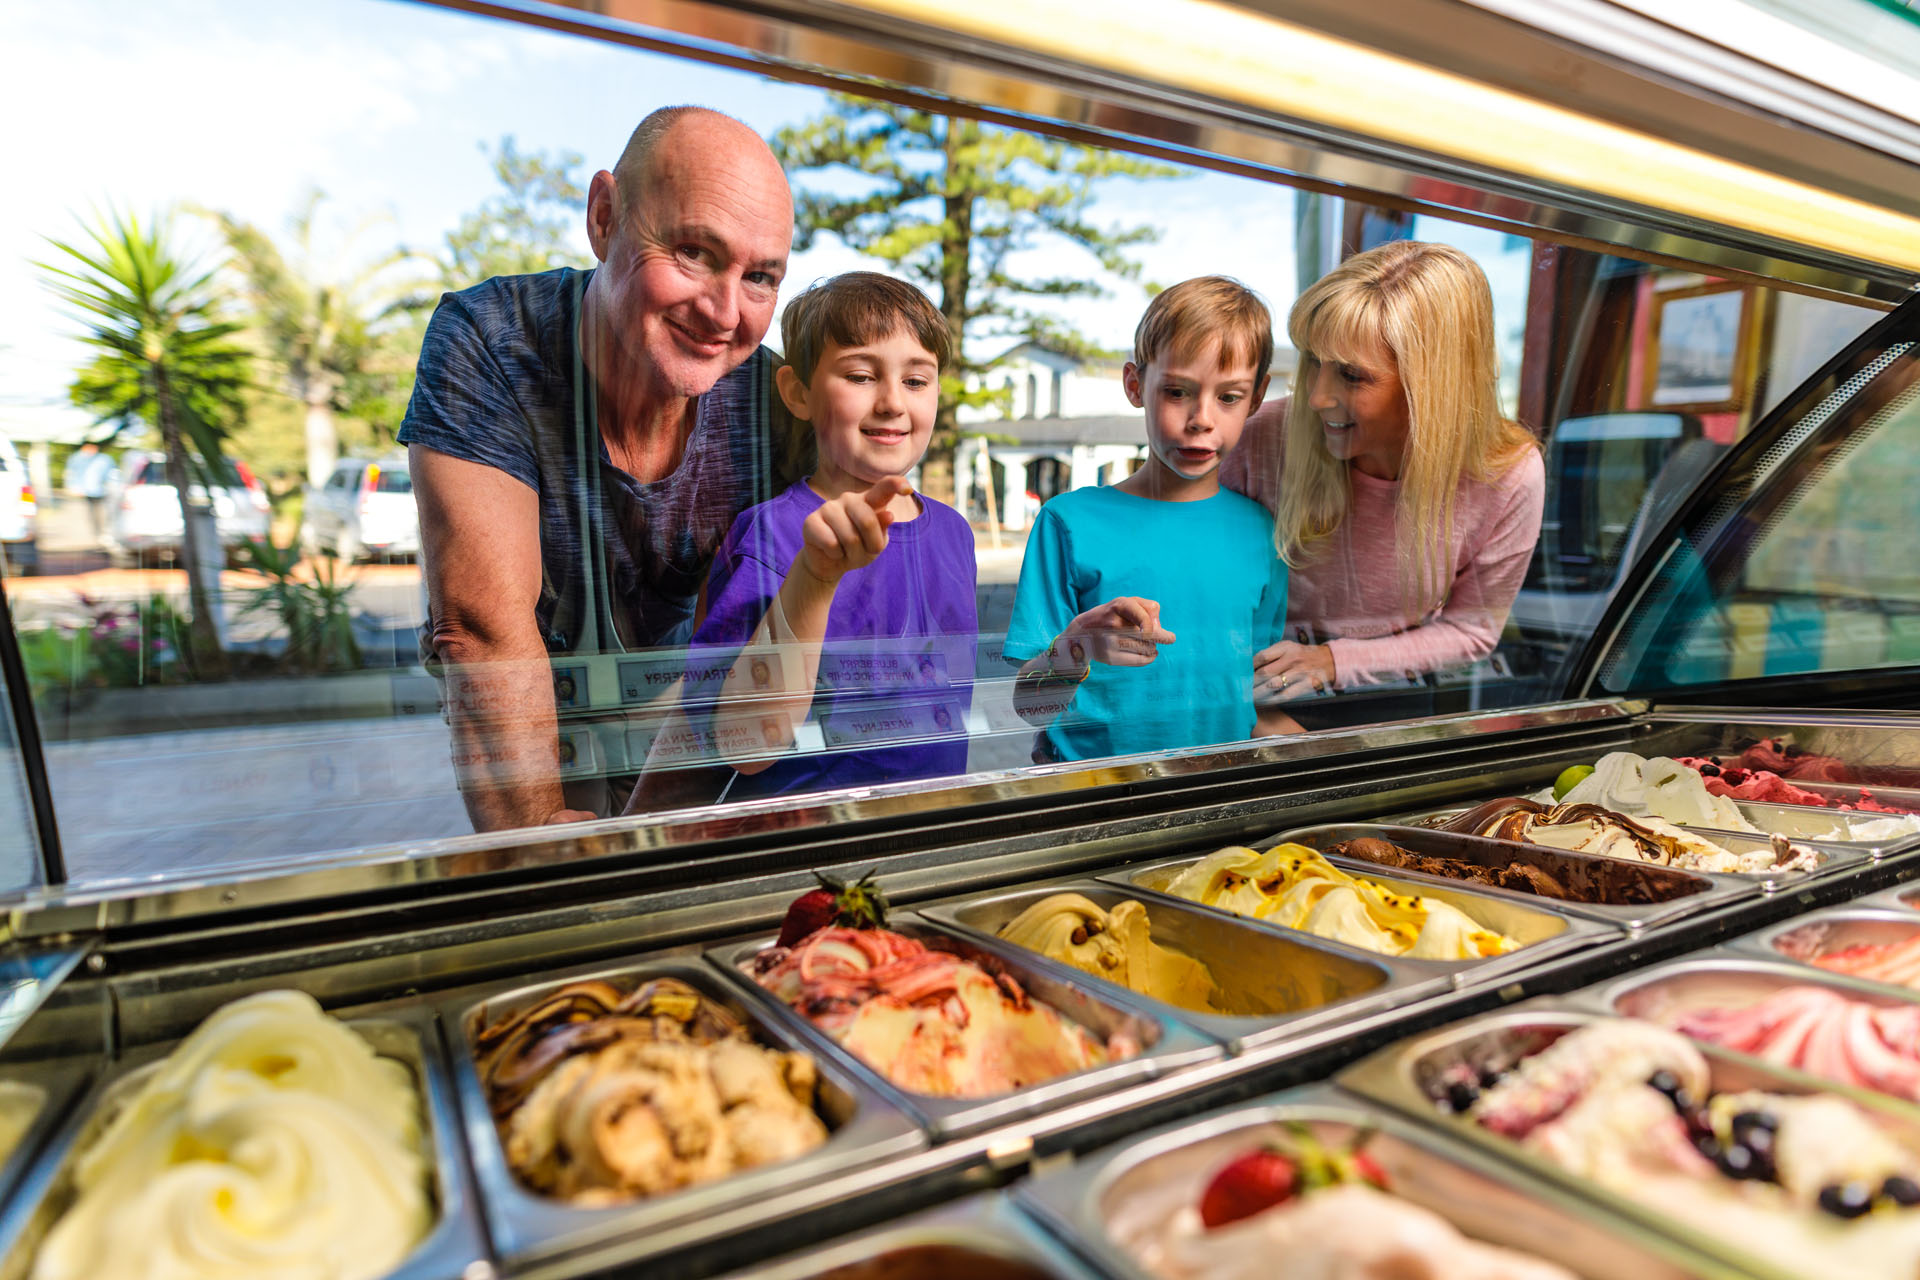 Lennox Head Ice cream - Family looking at ice cream flavours